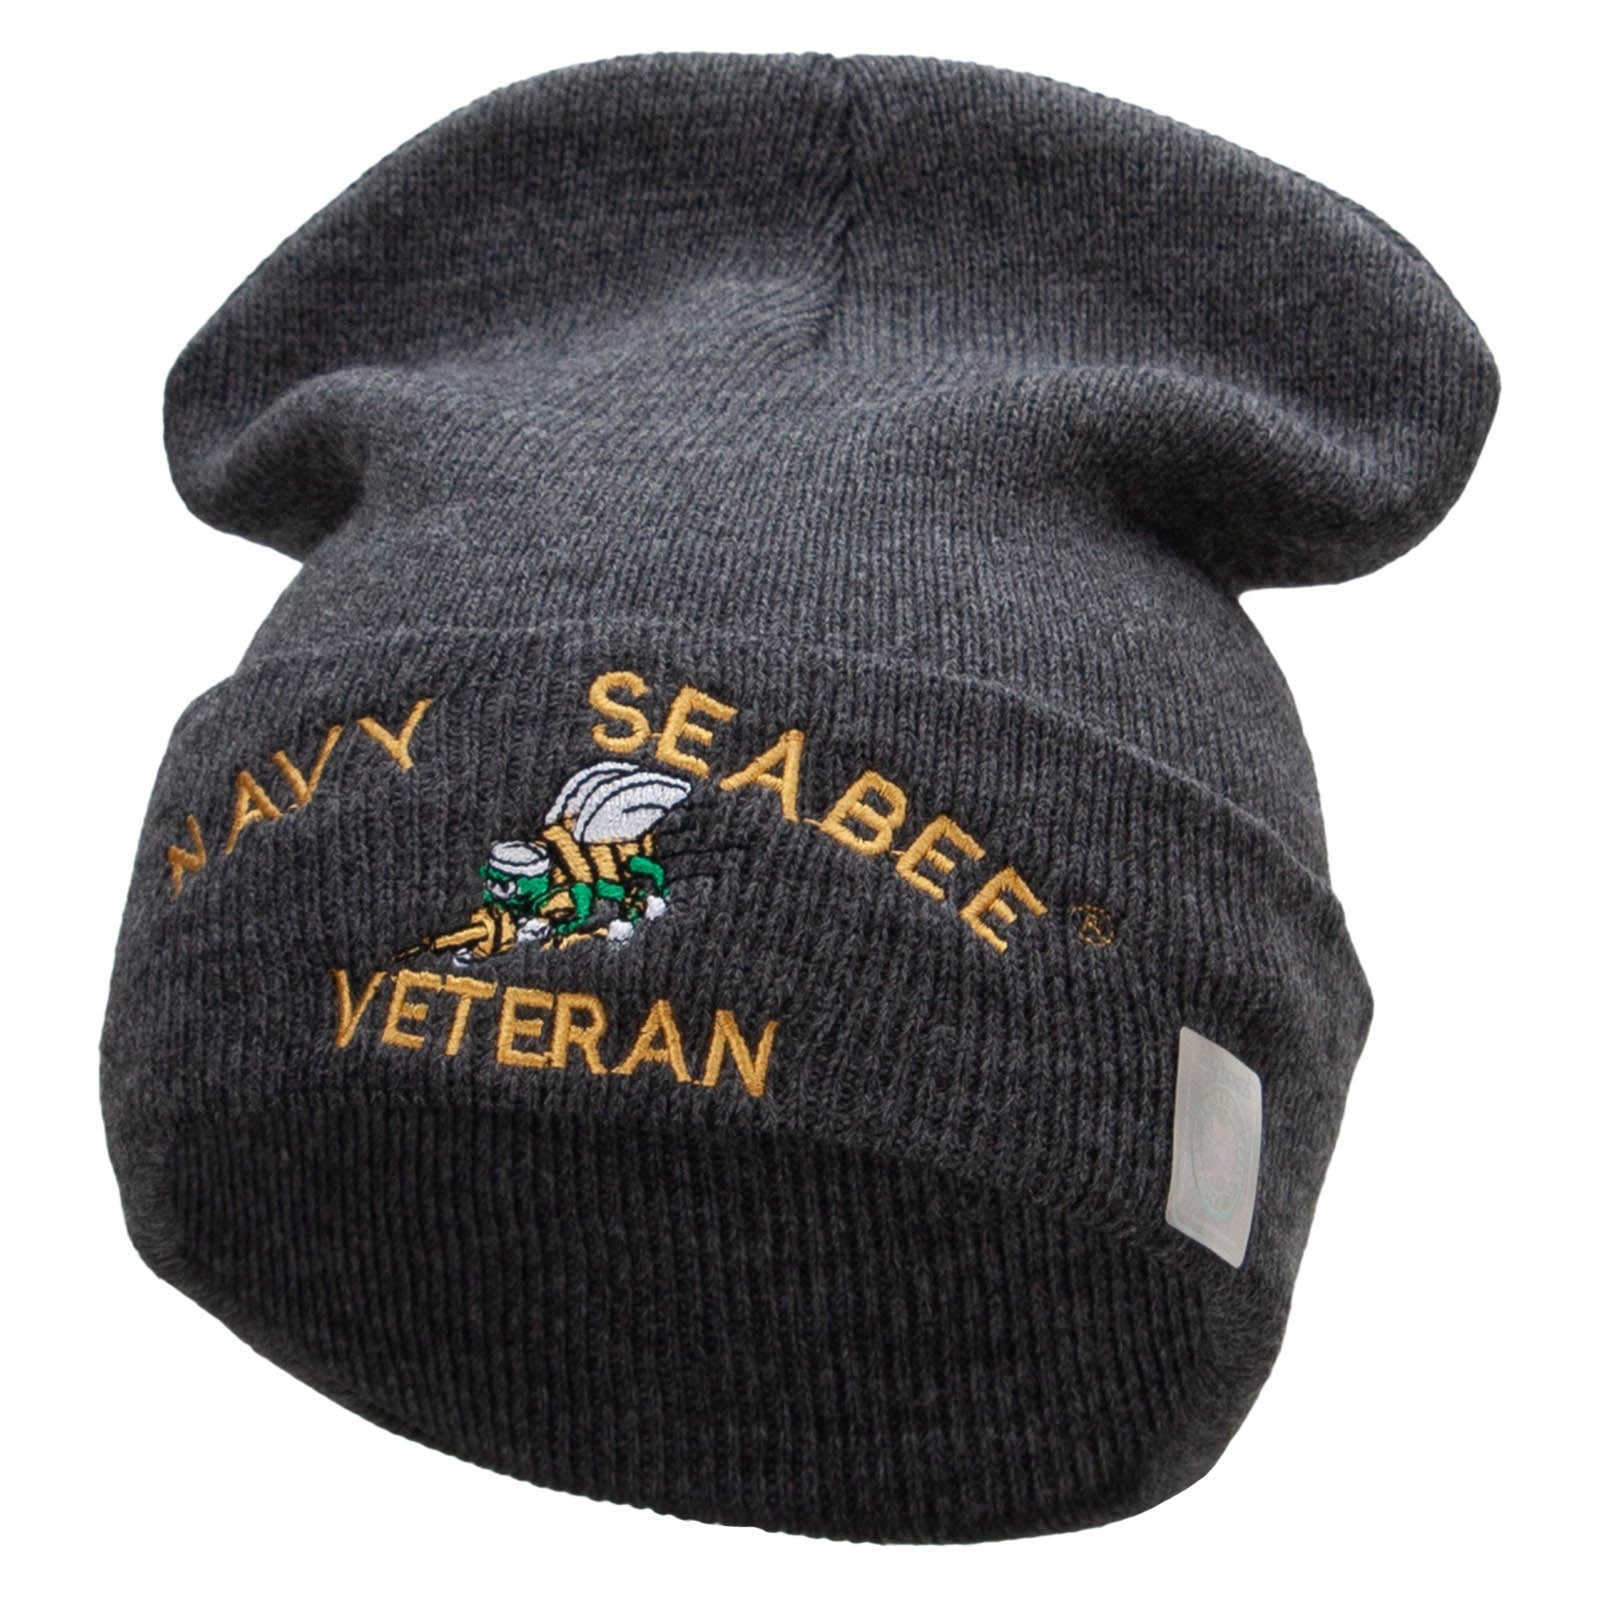 Licensed US Navy Seabee Veteran Military Embroidered Long Beanie Made in USA - Dk Grey OSFM